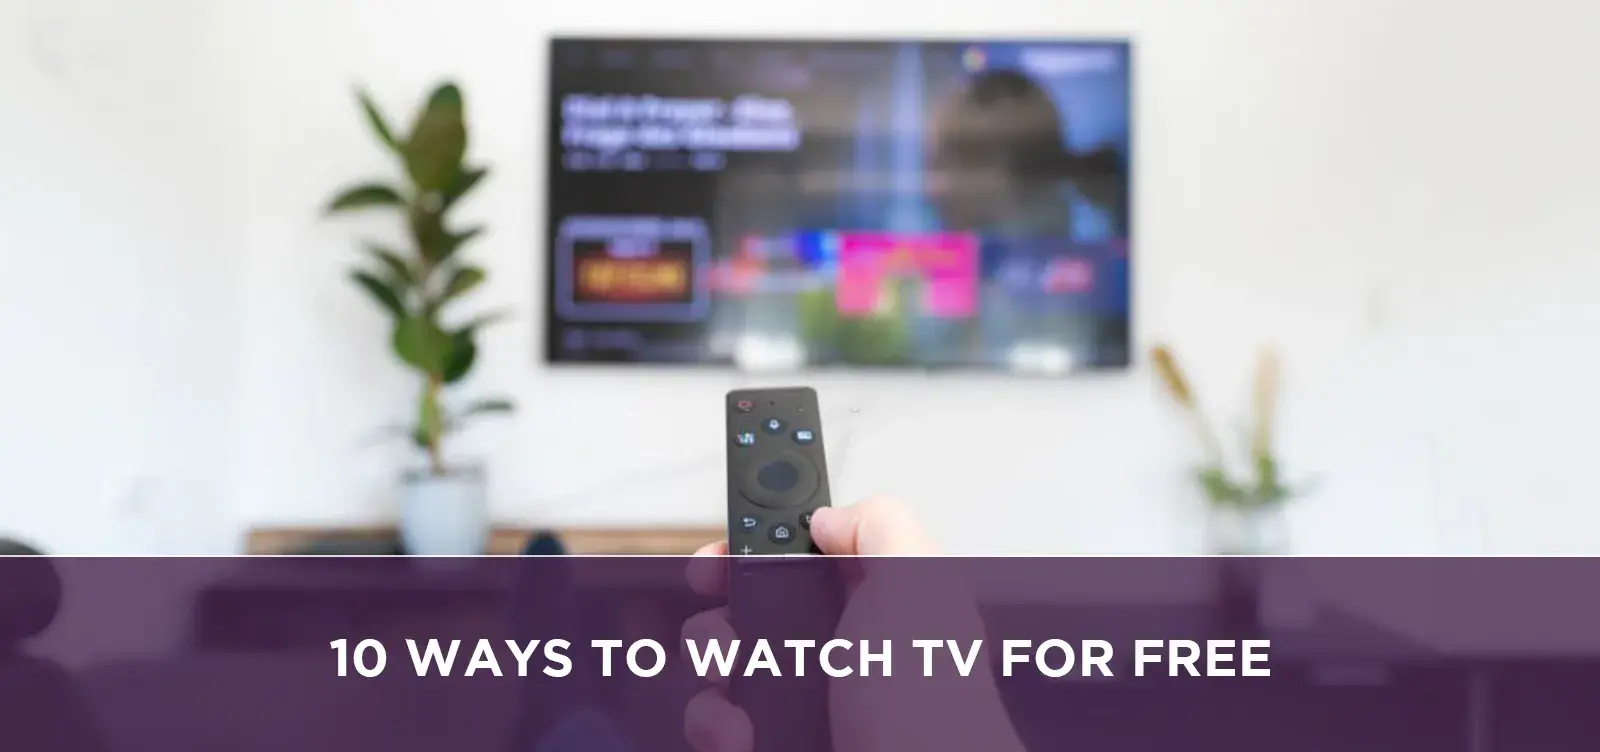 10 Ways to Watch TV for Free